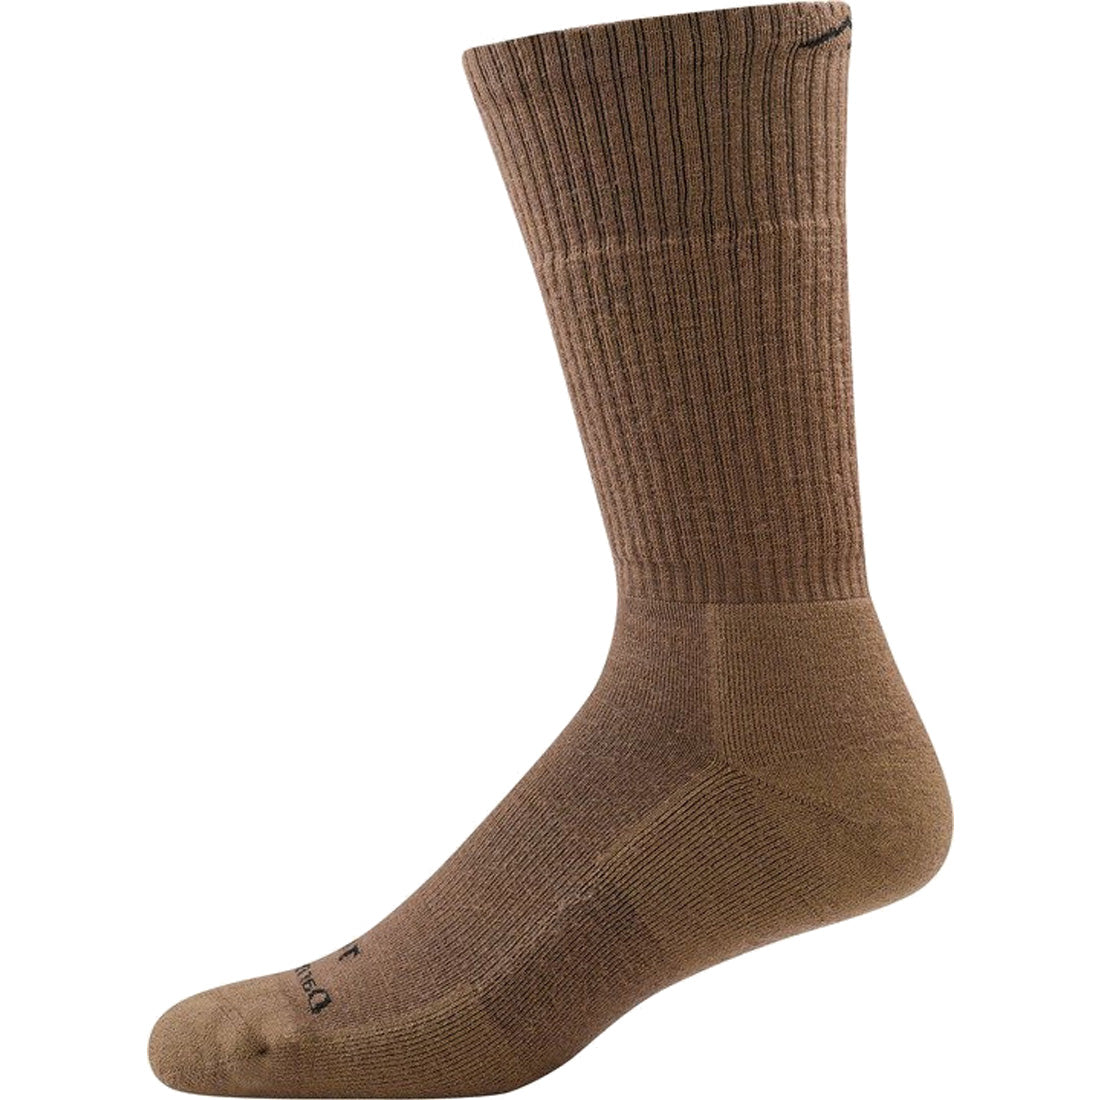 Darn Tough Vermont Midweight Tactical Sock with Cushion